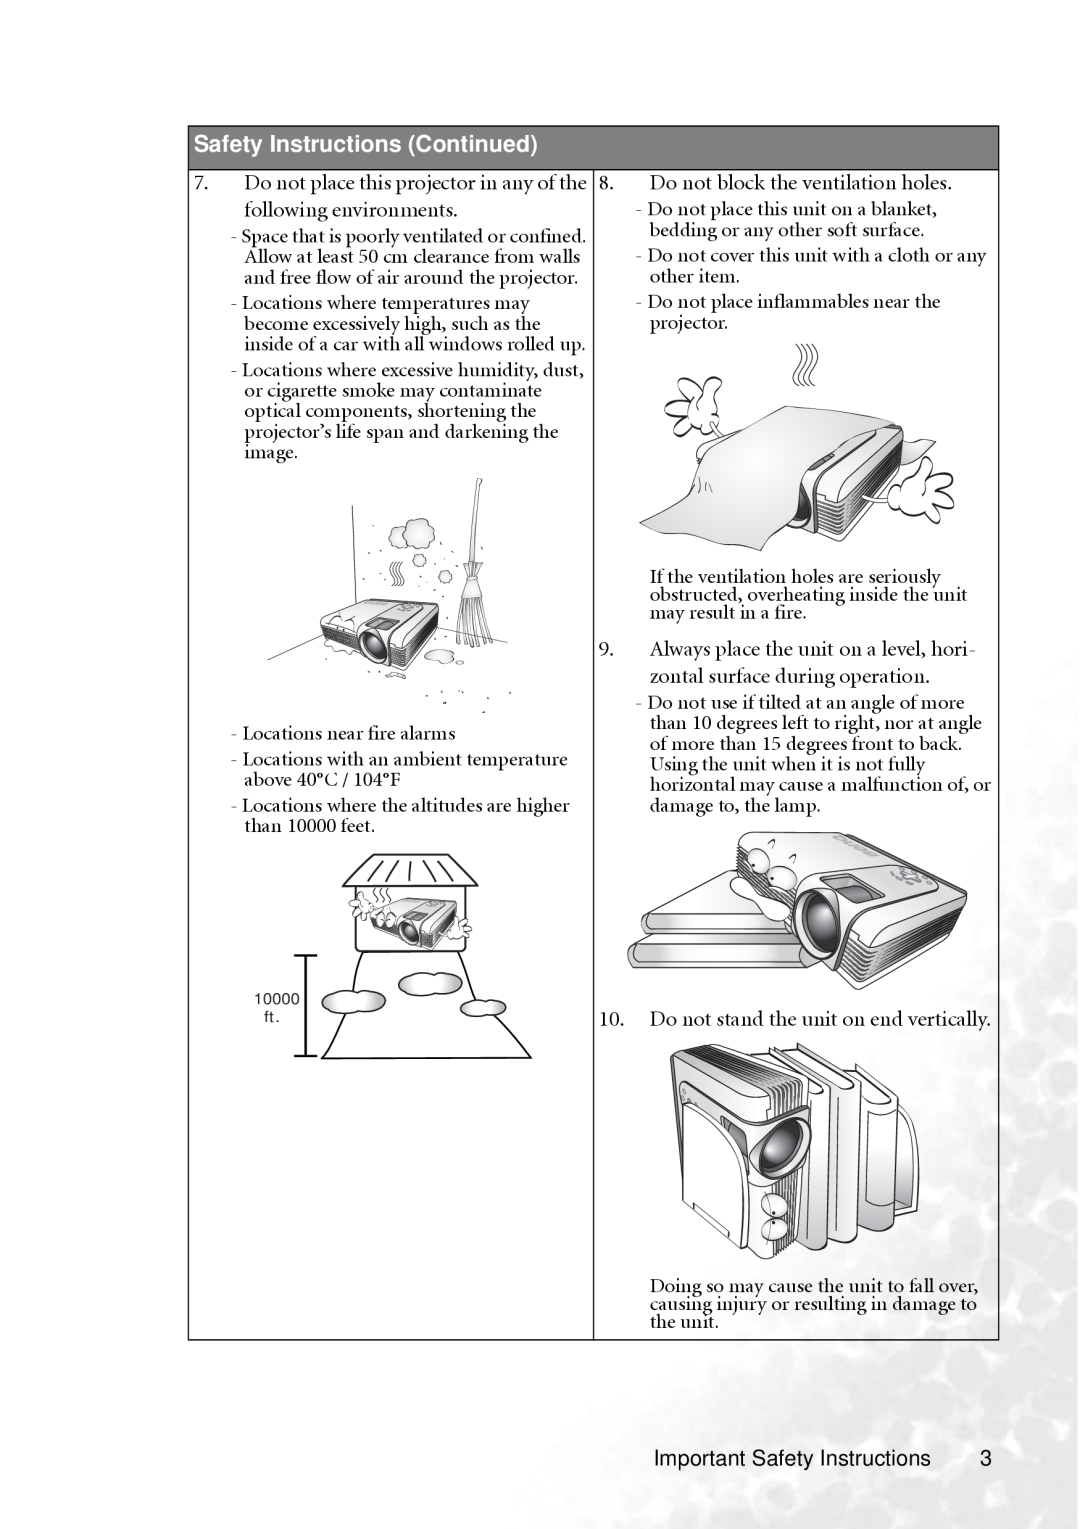 BenQ PB2240 user manual Safety Instructions Continued, Space that is poorly ventilated or confined 